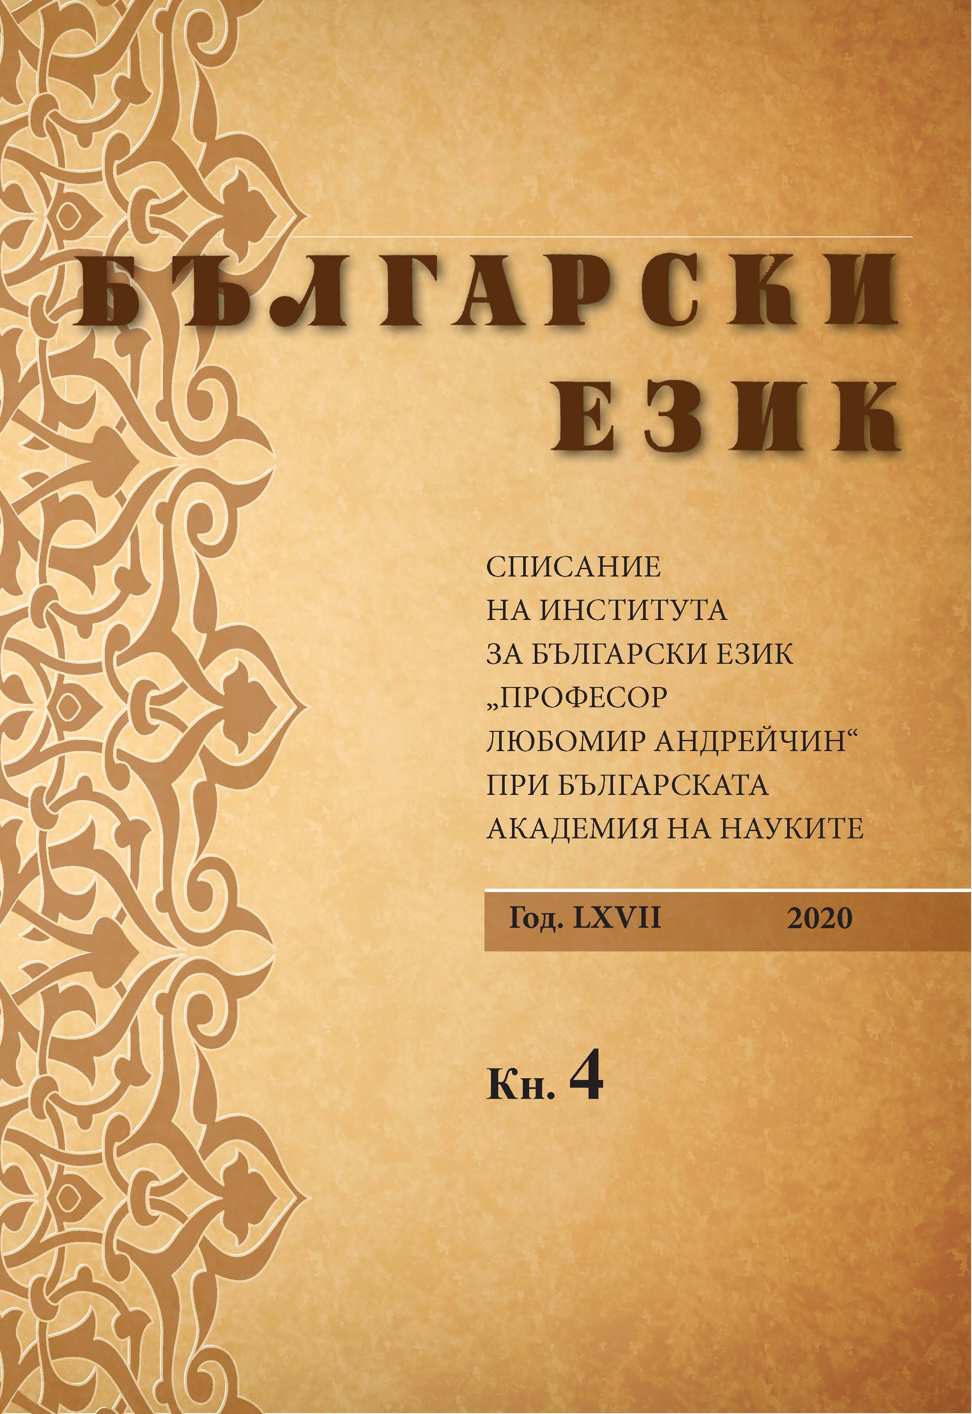 The Bulgarian Immigrants’ Dialect of the Village of Musabeyli, Edirne Region Cover Image